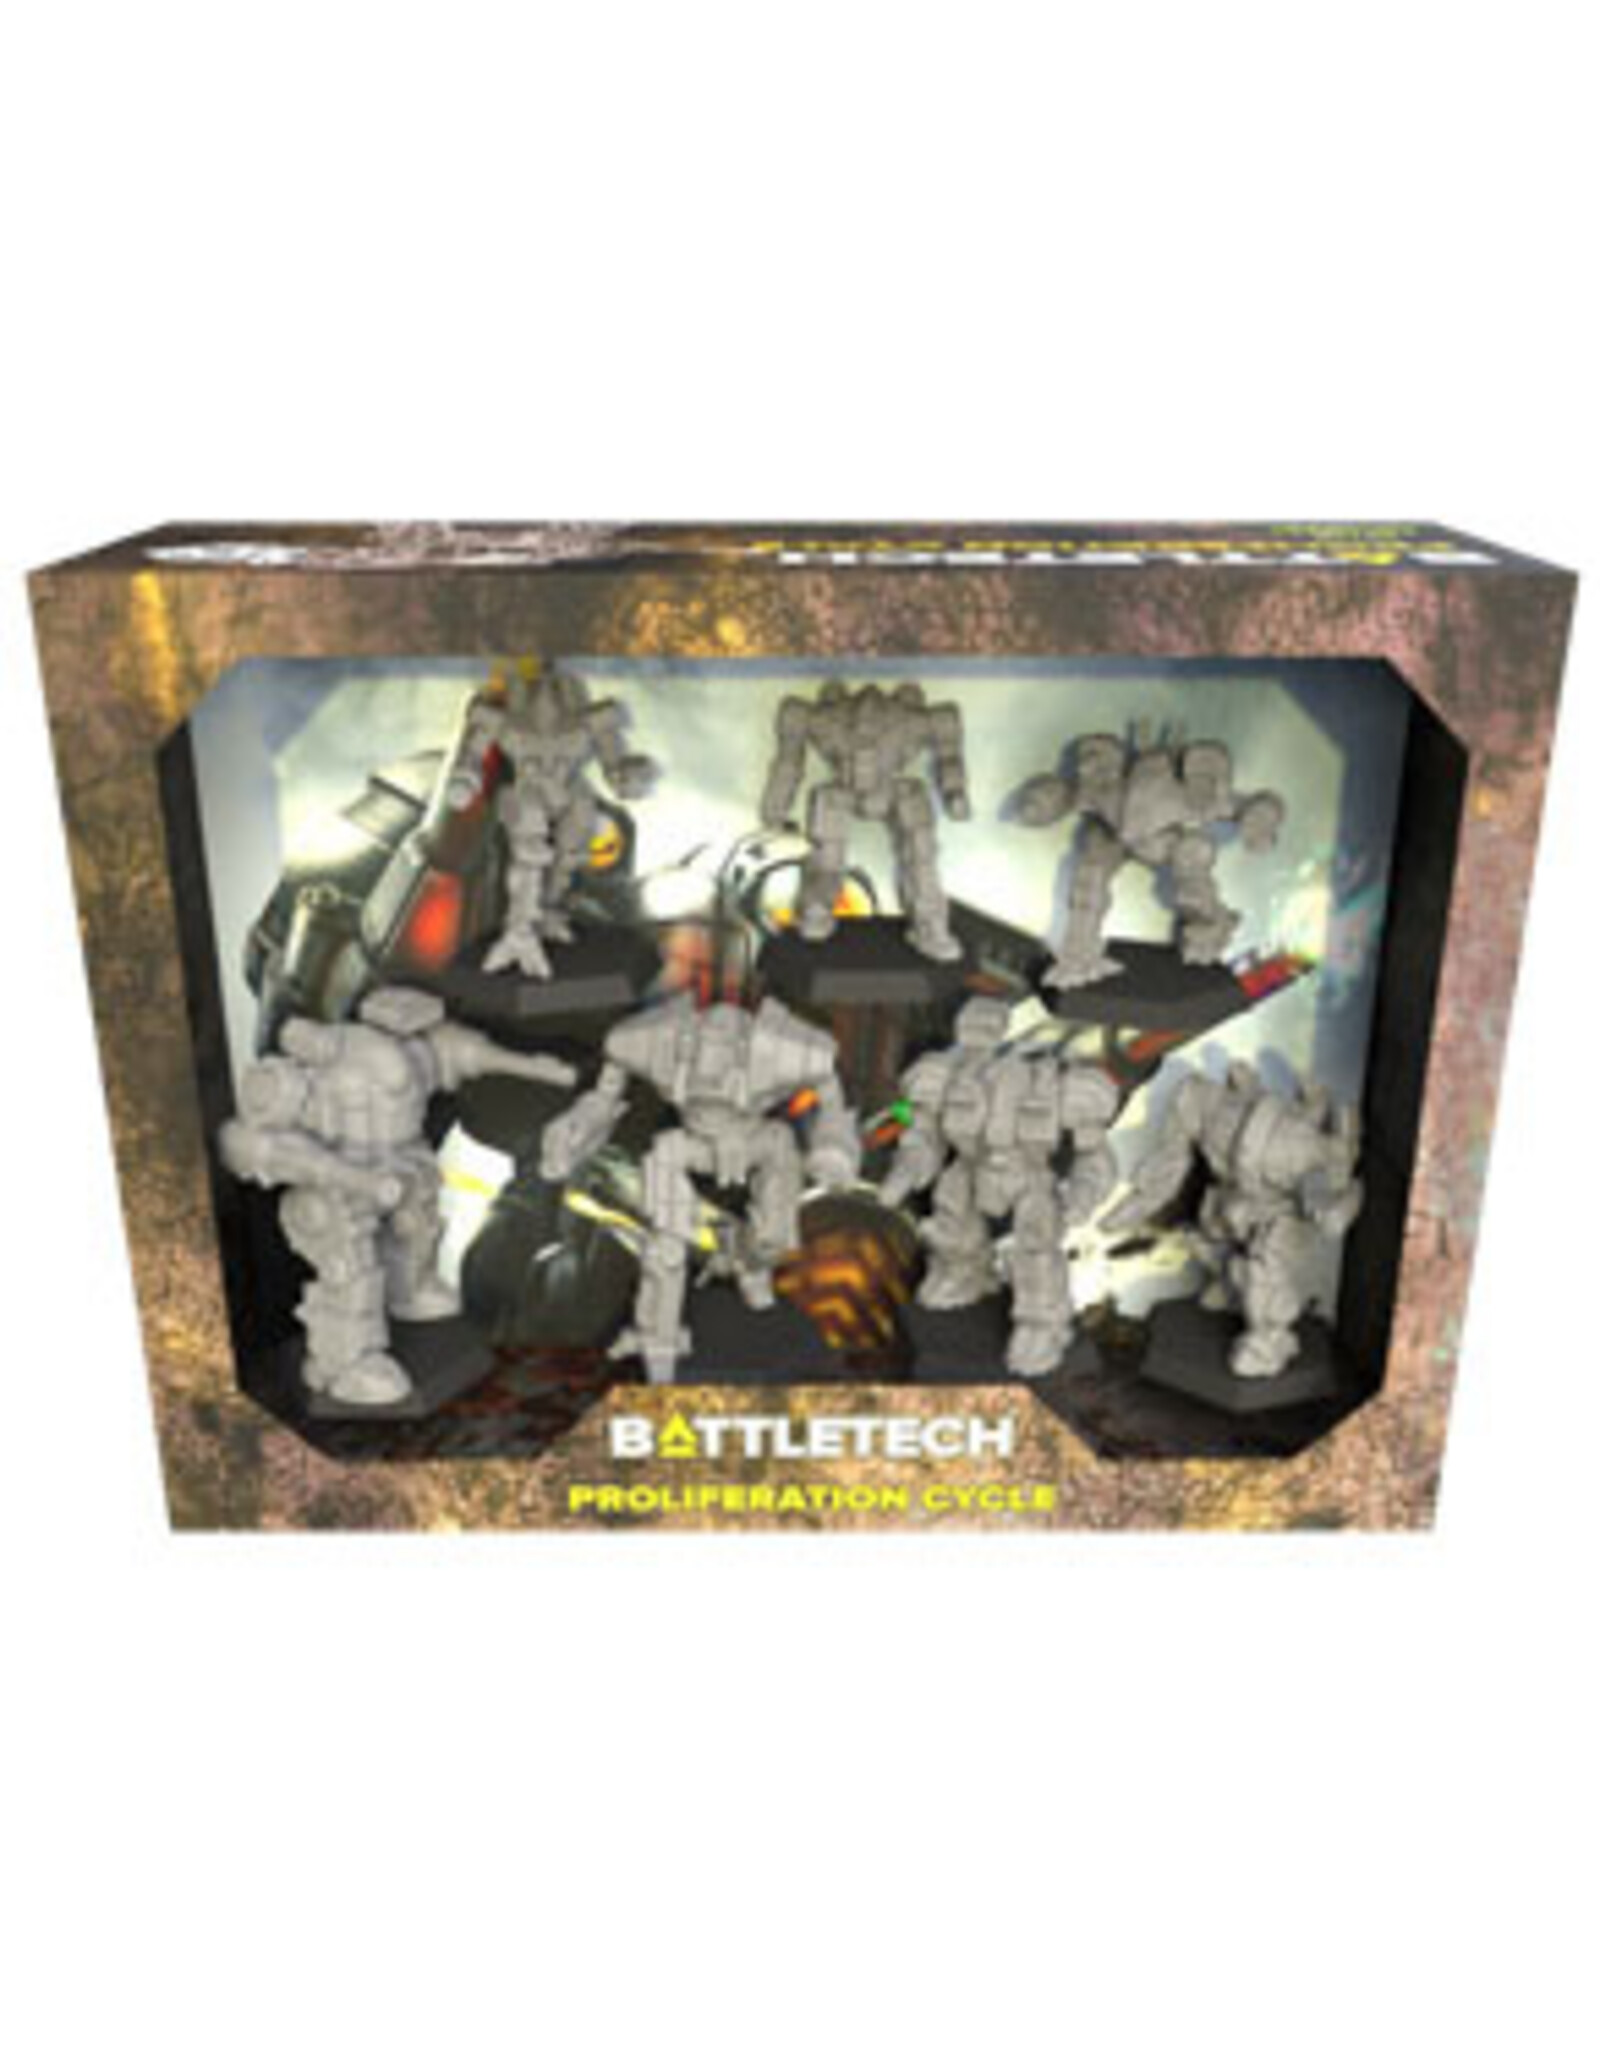 Catalyst Game Labs BattleTech: Miniature Force Pack - Proliferation Cycle Boxed Set